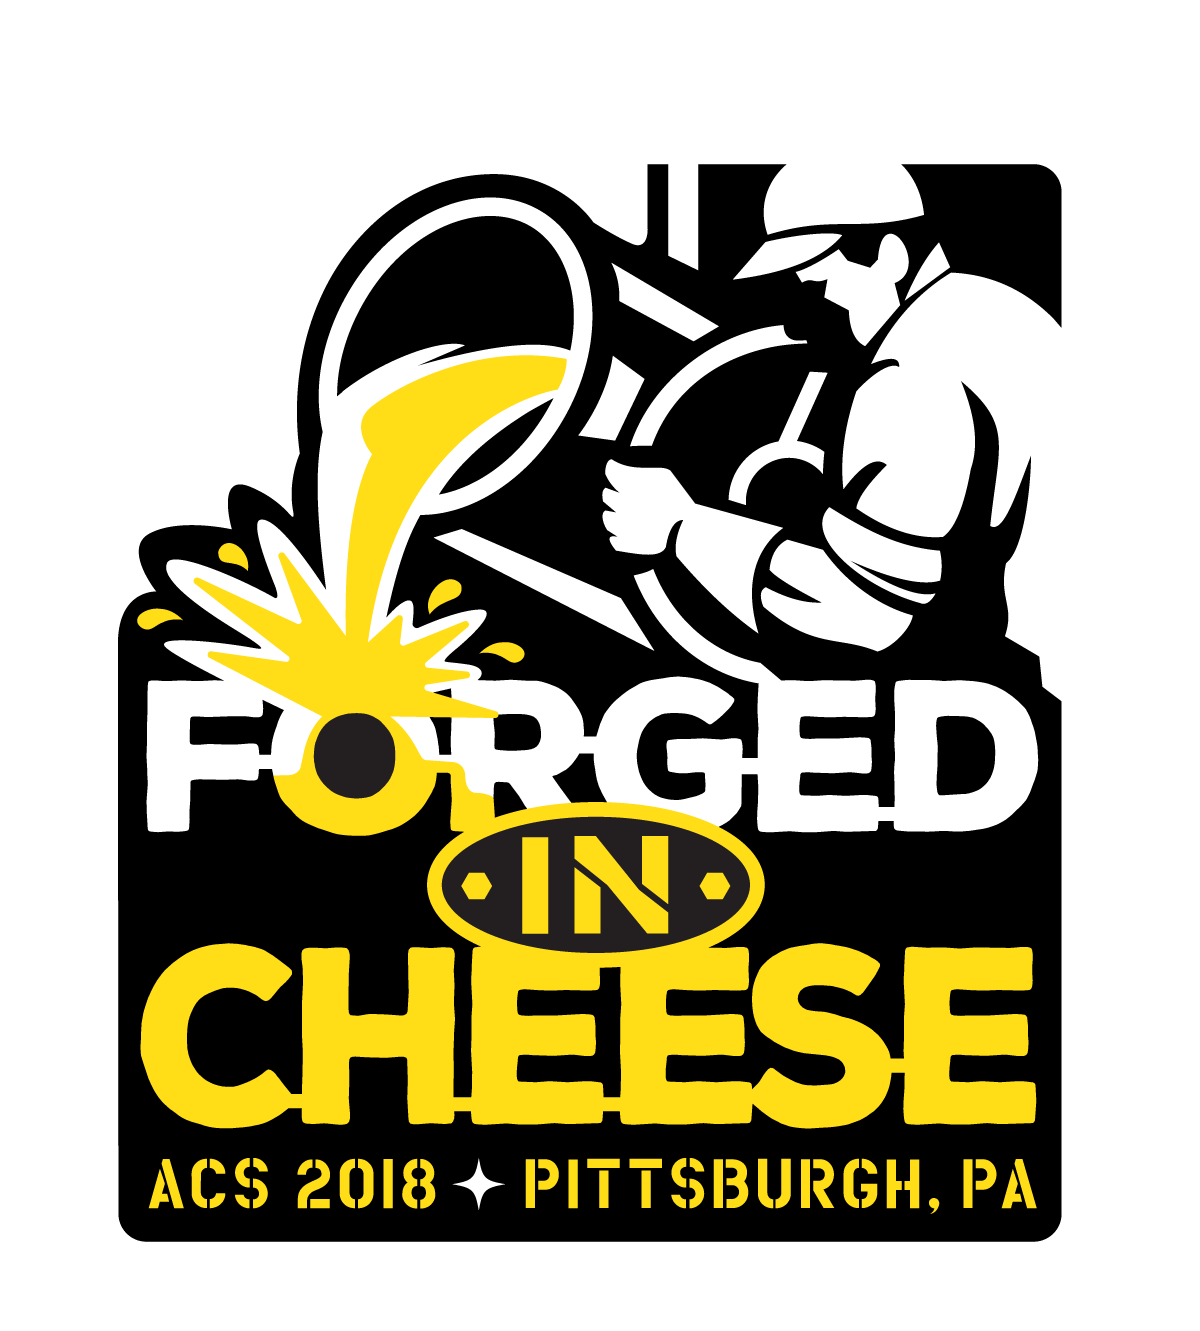 ACS 2018 Forged in Cheese Logo